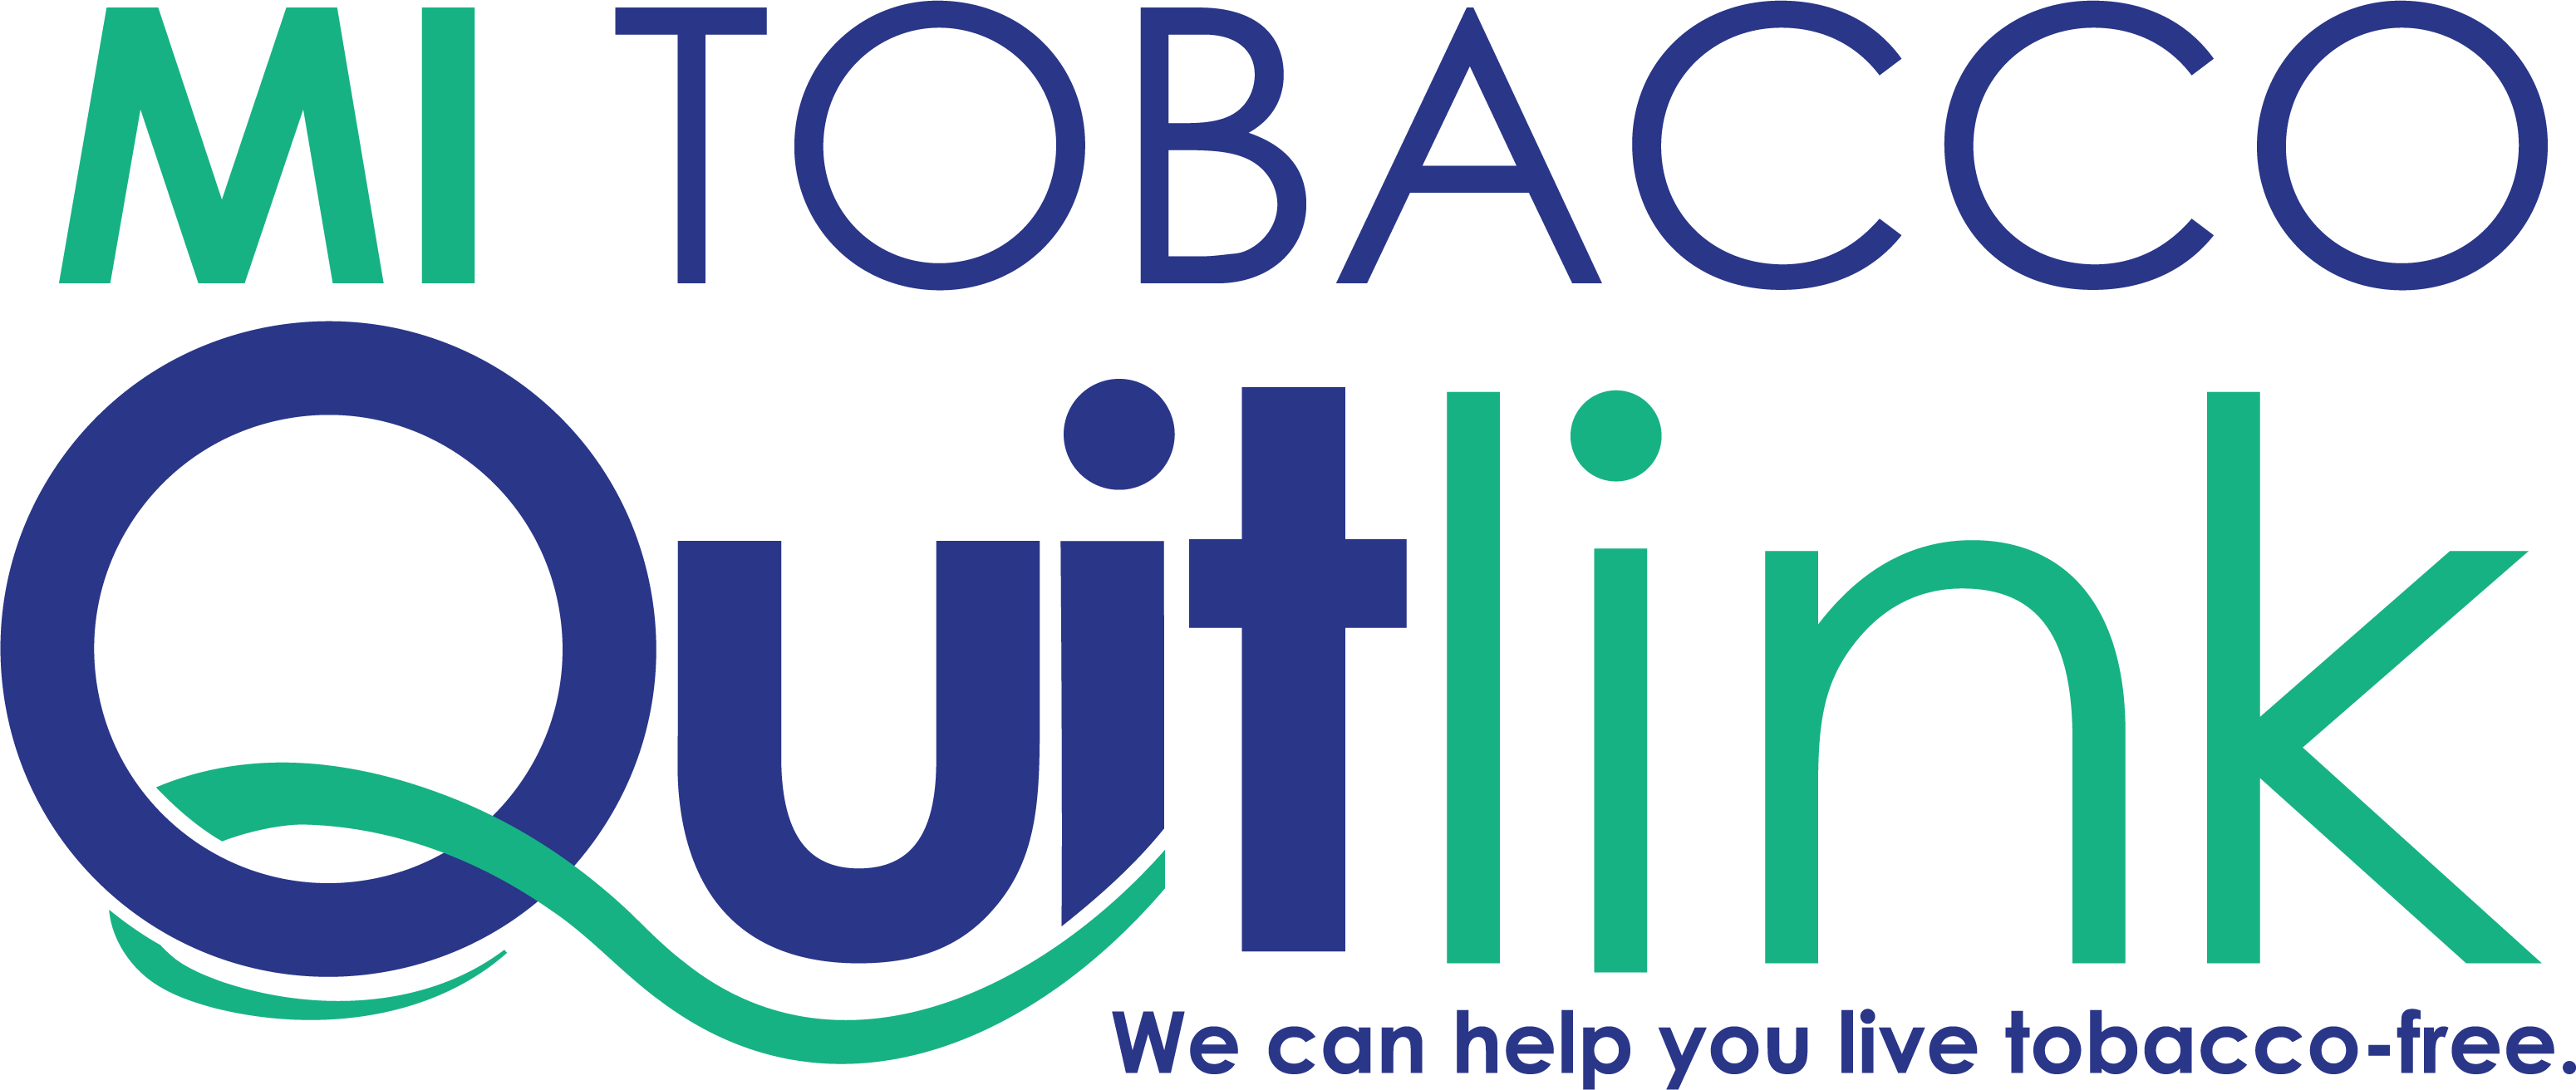 Michigan Tobacco Quitlink Logo activate to go to home